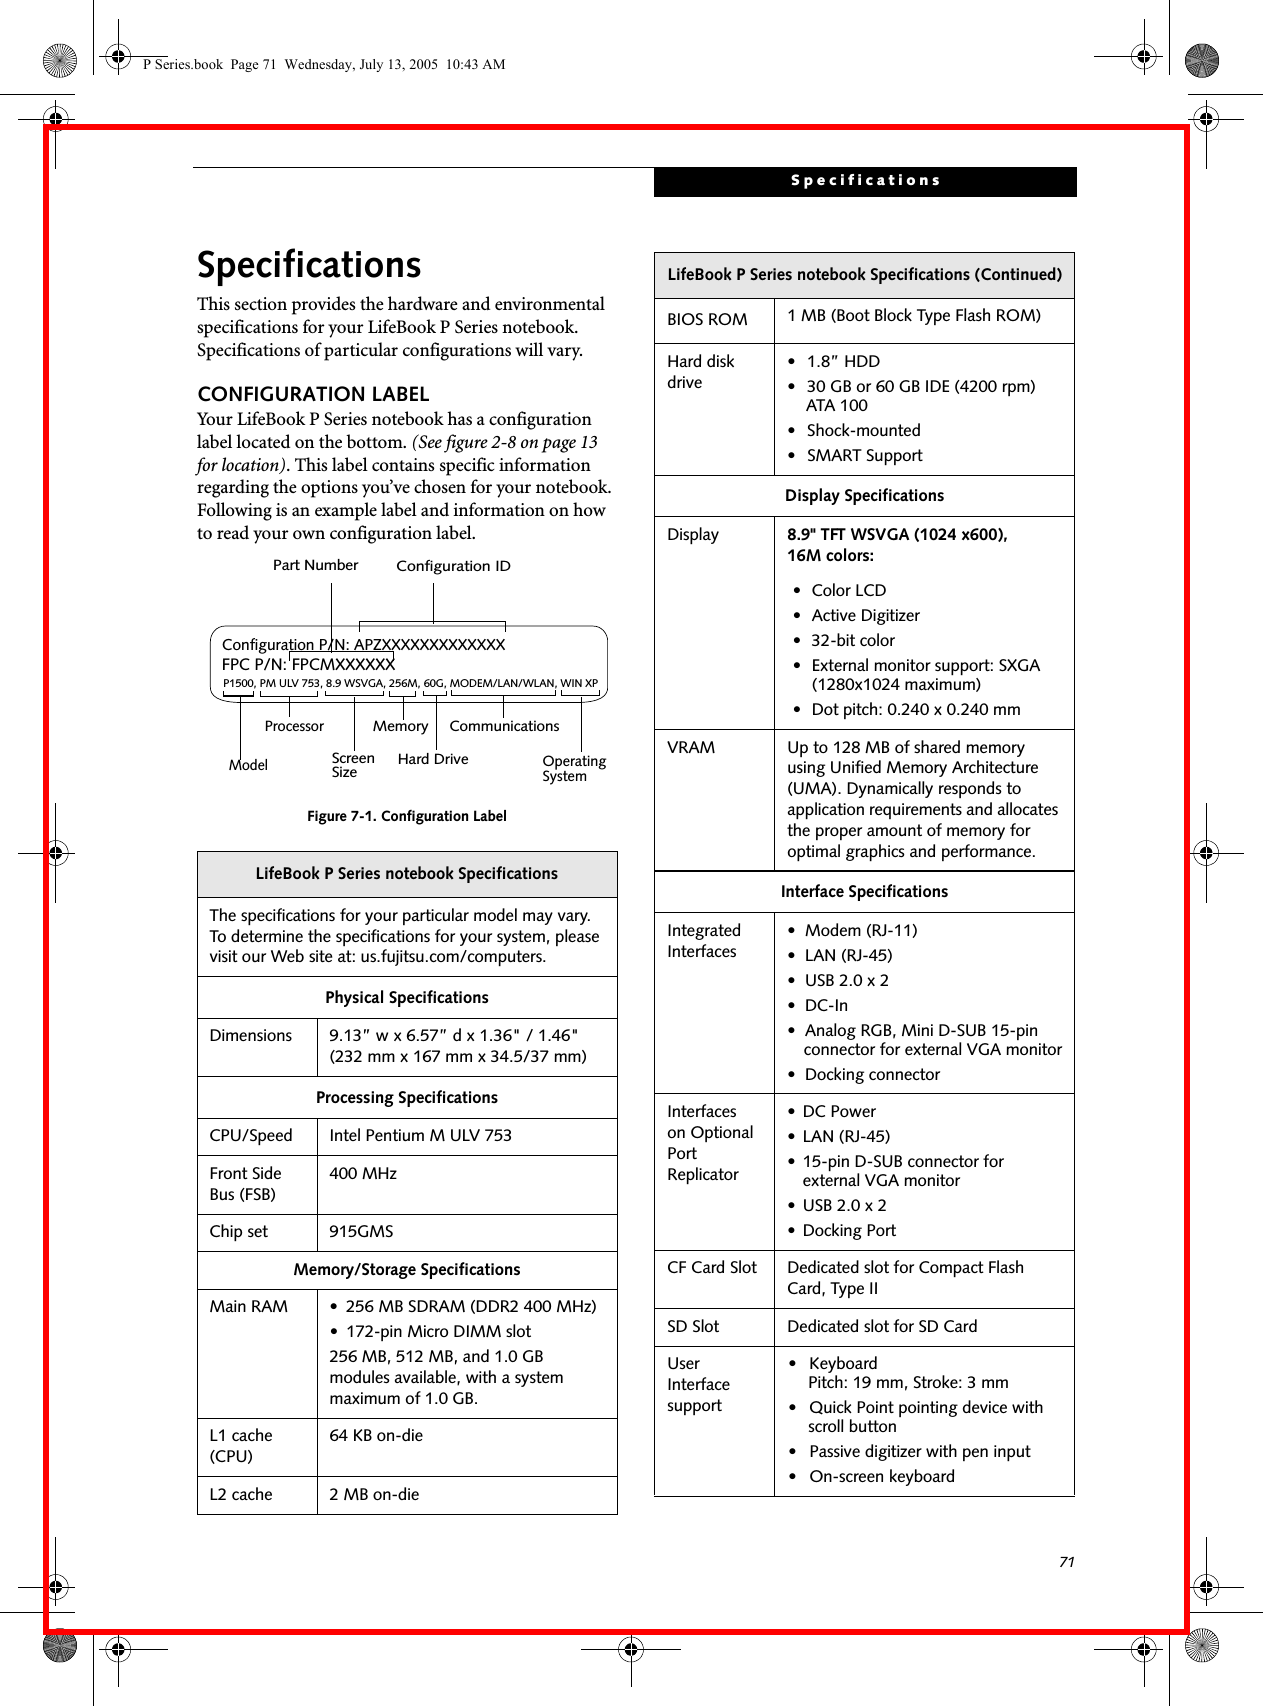 71SpecificationsSpecificationsThis section provides the hardware and environmental specifications for your LifeBook P Series notebook. Specifications of particular configurations will vary.CONFIGURATION LABELYour LifeBook P Series notebook has a configuration label located on the bottom. (See figure 2-8 on page 13 for location). This label contains specific information regarding the options you’ve chosen for your notebook. Following is an example label and information on how to read your own configuration label.Figure 7-1. Configuration LabelLifeBook P Series notebook SpecificationsThe specifications for your particular model may vary. To determine the specifications for your system, please visit our Web site at: us.fujitsu.com/computers.Physical SpecificationsDimensions 9.13” w x 6.57” d x 1.36&quot; / 1.46&quot; (232 mm x 167 mm x 34.5/37 mm)Processing SpecificationsCPU/Speed Intel Pentium M ULV 753Front Side Bus (FSB)400 MHzChip set 915GMSMemory/Storage SpecificationsMain RAM • 256 MB SDRAM (DDR2 400 MHz)• 172-pin Micro DIMM slot256 MB, 512 MB, and 1.0 GB modules available, with a system maximum of 1.0 GB.L1 cache (CPU)64 KB on-die L2 cache 2 MB on-die P1500, PM ULV 753, 8.9 WSVGA, 256M, 60G, MODEM/LAN/WLAN, WIN XPConfiguration P/N: APZXXXXXXXXXXXXXFPC P/N: FPCMXXXXXXModelProcessorScreenSizeOperatingSystemHard Drive Part NumberConfiguration IDMemory CommunicationsBIOS ROM 1 MB (Boot Block Type Flash ROM)Hard disk drive• 1.8” HDD• 30 GB or 60 GB IDE (4200 rpm)ATA 100• Shock-mounted• SMART SupportDisplay SpecificationsDisplay 8.9&quot; TFT WSVGA (1024 x600), 16M colors:• Color LCD• Active Digitizer• 32-bit color• External monitor support: SXGA (1280x1024 maximum)• Dot pitch: 0.240 x 0.240 mmVRAM Up to 128 MB of shared memory using Unified Memory Architecture (UMA). Dynamically responds to application requirements and allocates the proper amount of memory for optimal graphics and performance. Interface SpecificationsIntegrated Interfaces• Modem (RJ-11)• LAN (RJ-45)• USB 2.0 x 2•DC-In• Analog RGB, Mini D-SUB 15-pin connector for external VGA monitor• Docking connectorInterfaceson Optional Port Replicator • DC Power• LAN (RJ-45)• 15-pin D-SUB connector for external VGA monitor• USB 2.0 x 2• Docking PortCF Card Slot Dedicated slot for Compact Flash Card, Type IISD Slot Dedicated slot for SD CardUser Interface support• Keyboard Pitch: 19 mm, Stroke: 3 mm• Quick Point pointing device with scroll button• Passive digitizer with pen input• On-screen keyboardLifeBook P Series notebook Specifications (Continued)P Series.book  Page 71  Wednesday, July 13, 2005  10:43 AM